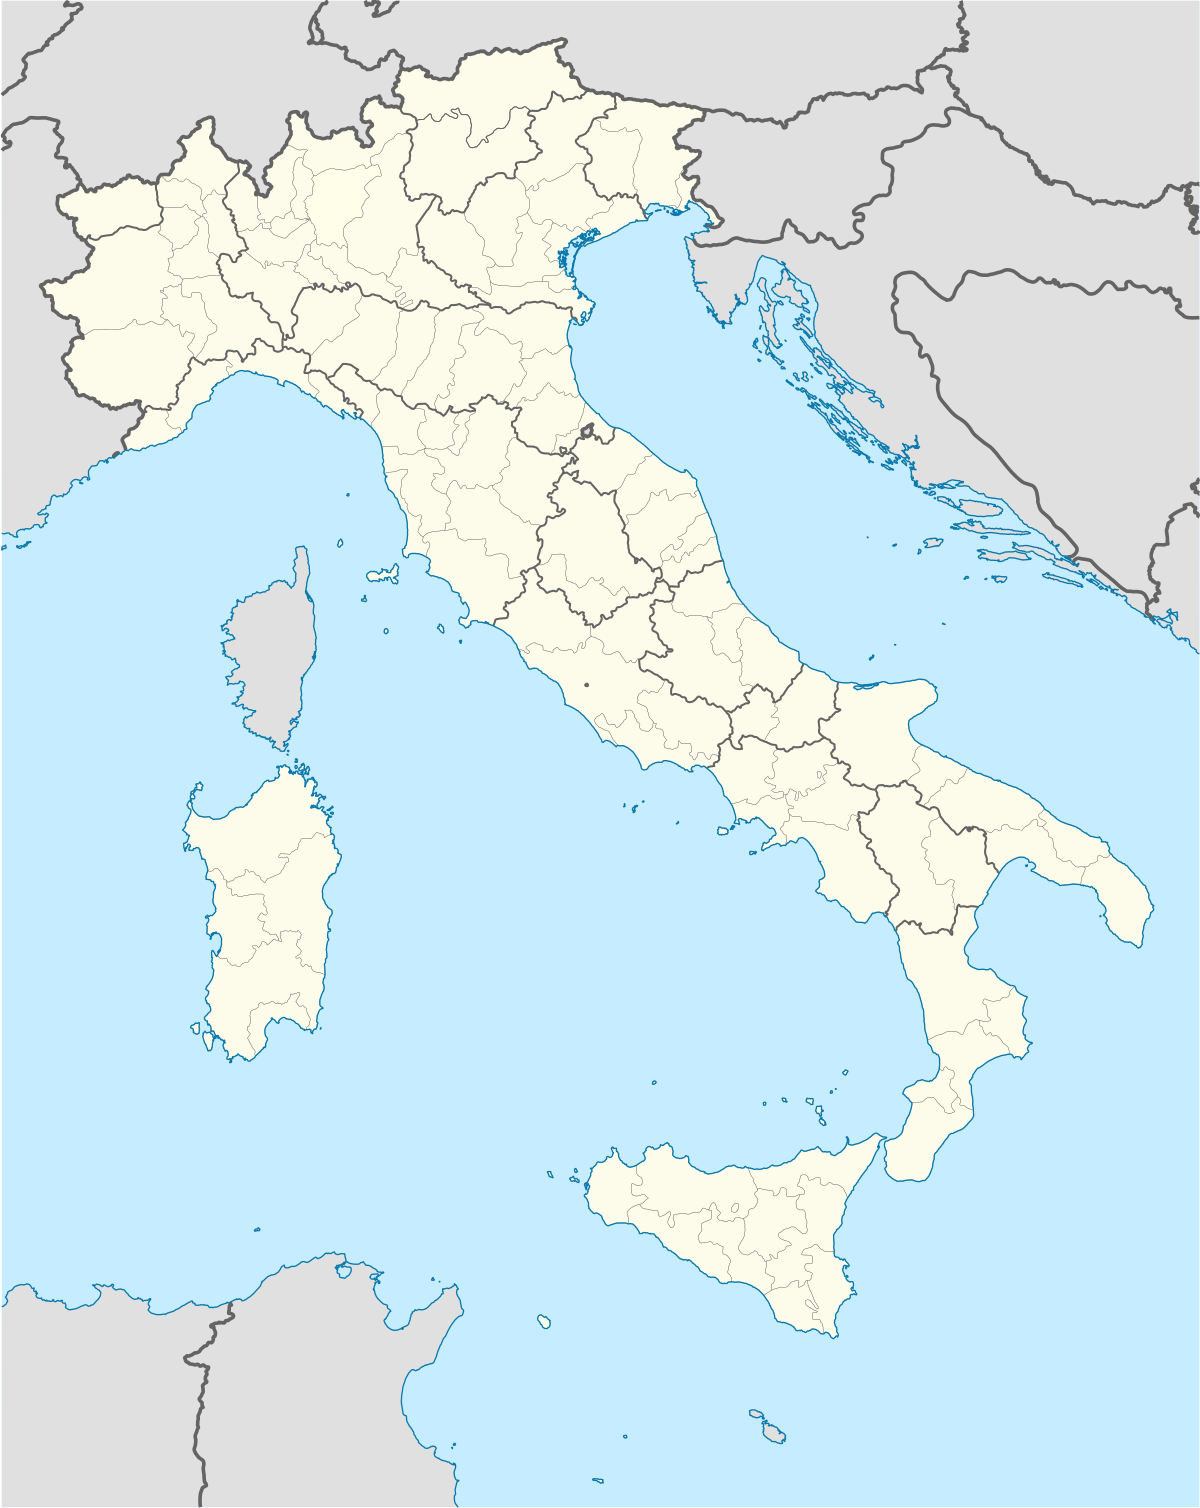 A map of italy with dots indicating World Heritage Sites